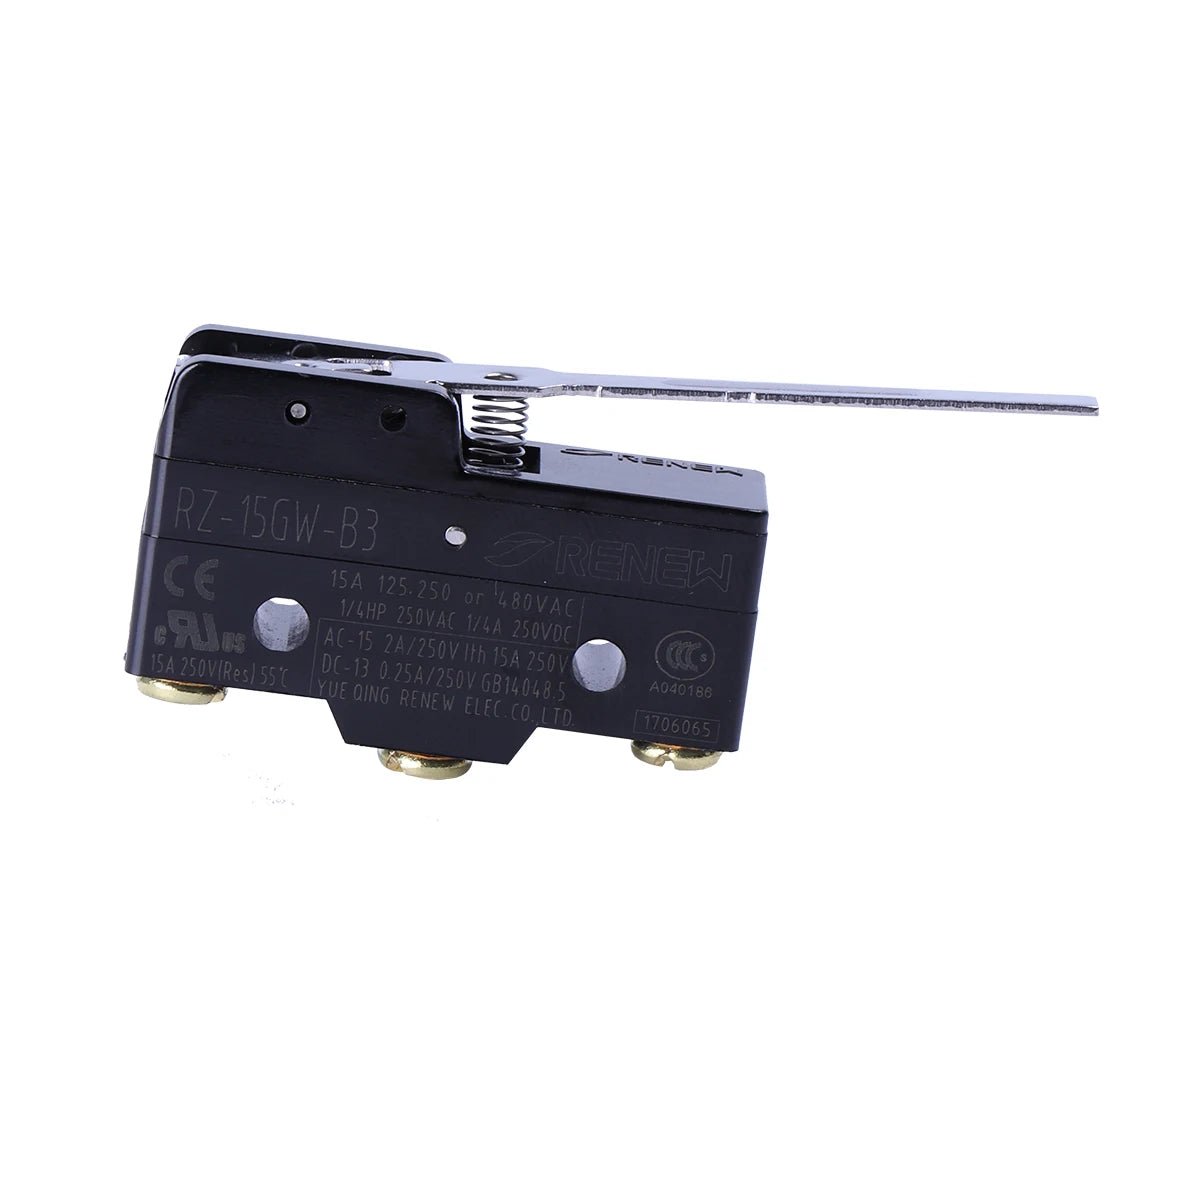 2pc RZ-15GW-B3 Momentary Limit Micro switch, Push Button SPDT Lever Hinge Roller - JIVTO